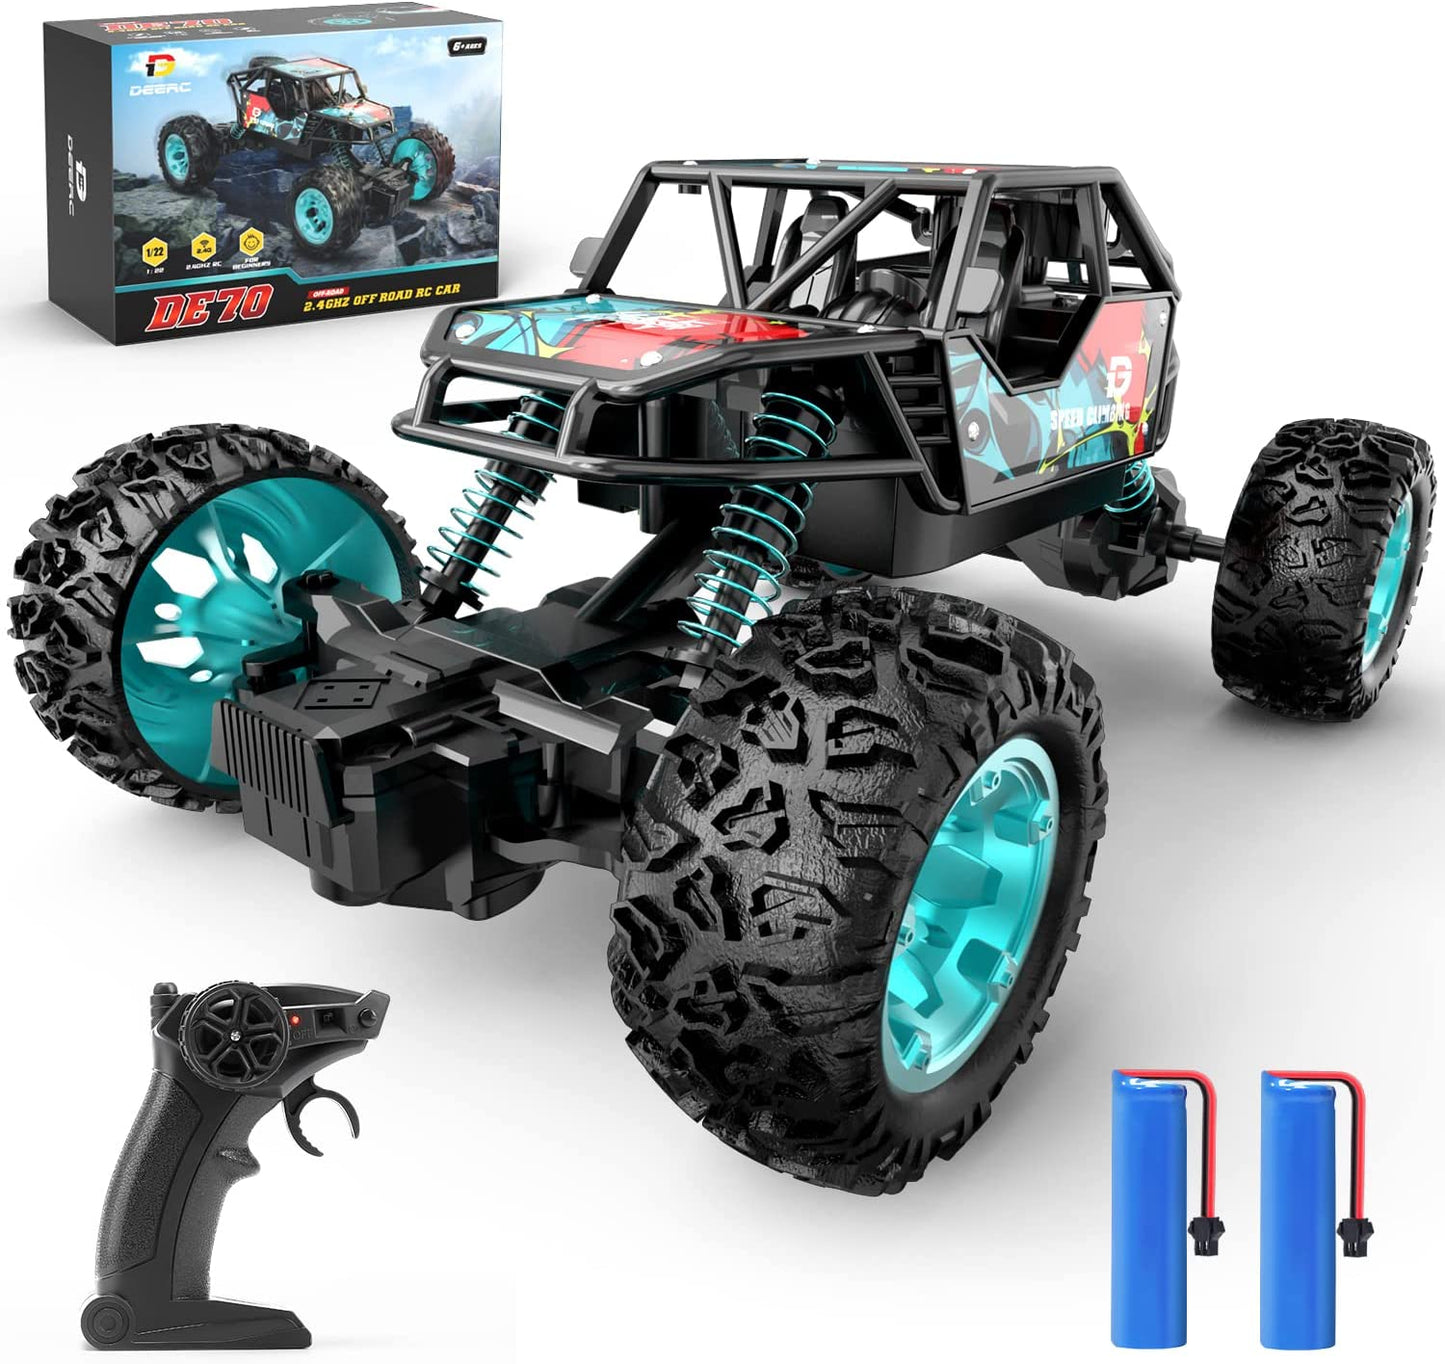 DE70 Remote Control Truck W/ Metal Shell, 60+ Mins, 2.4G Remote Control Car, 1:22 RC Cars Crawler for Boys, RC Monster Trucks, Toy Vehicle Car Gift for Kids Adults Girls